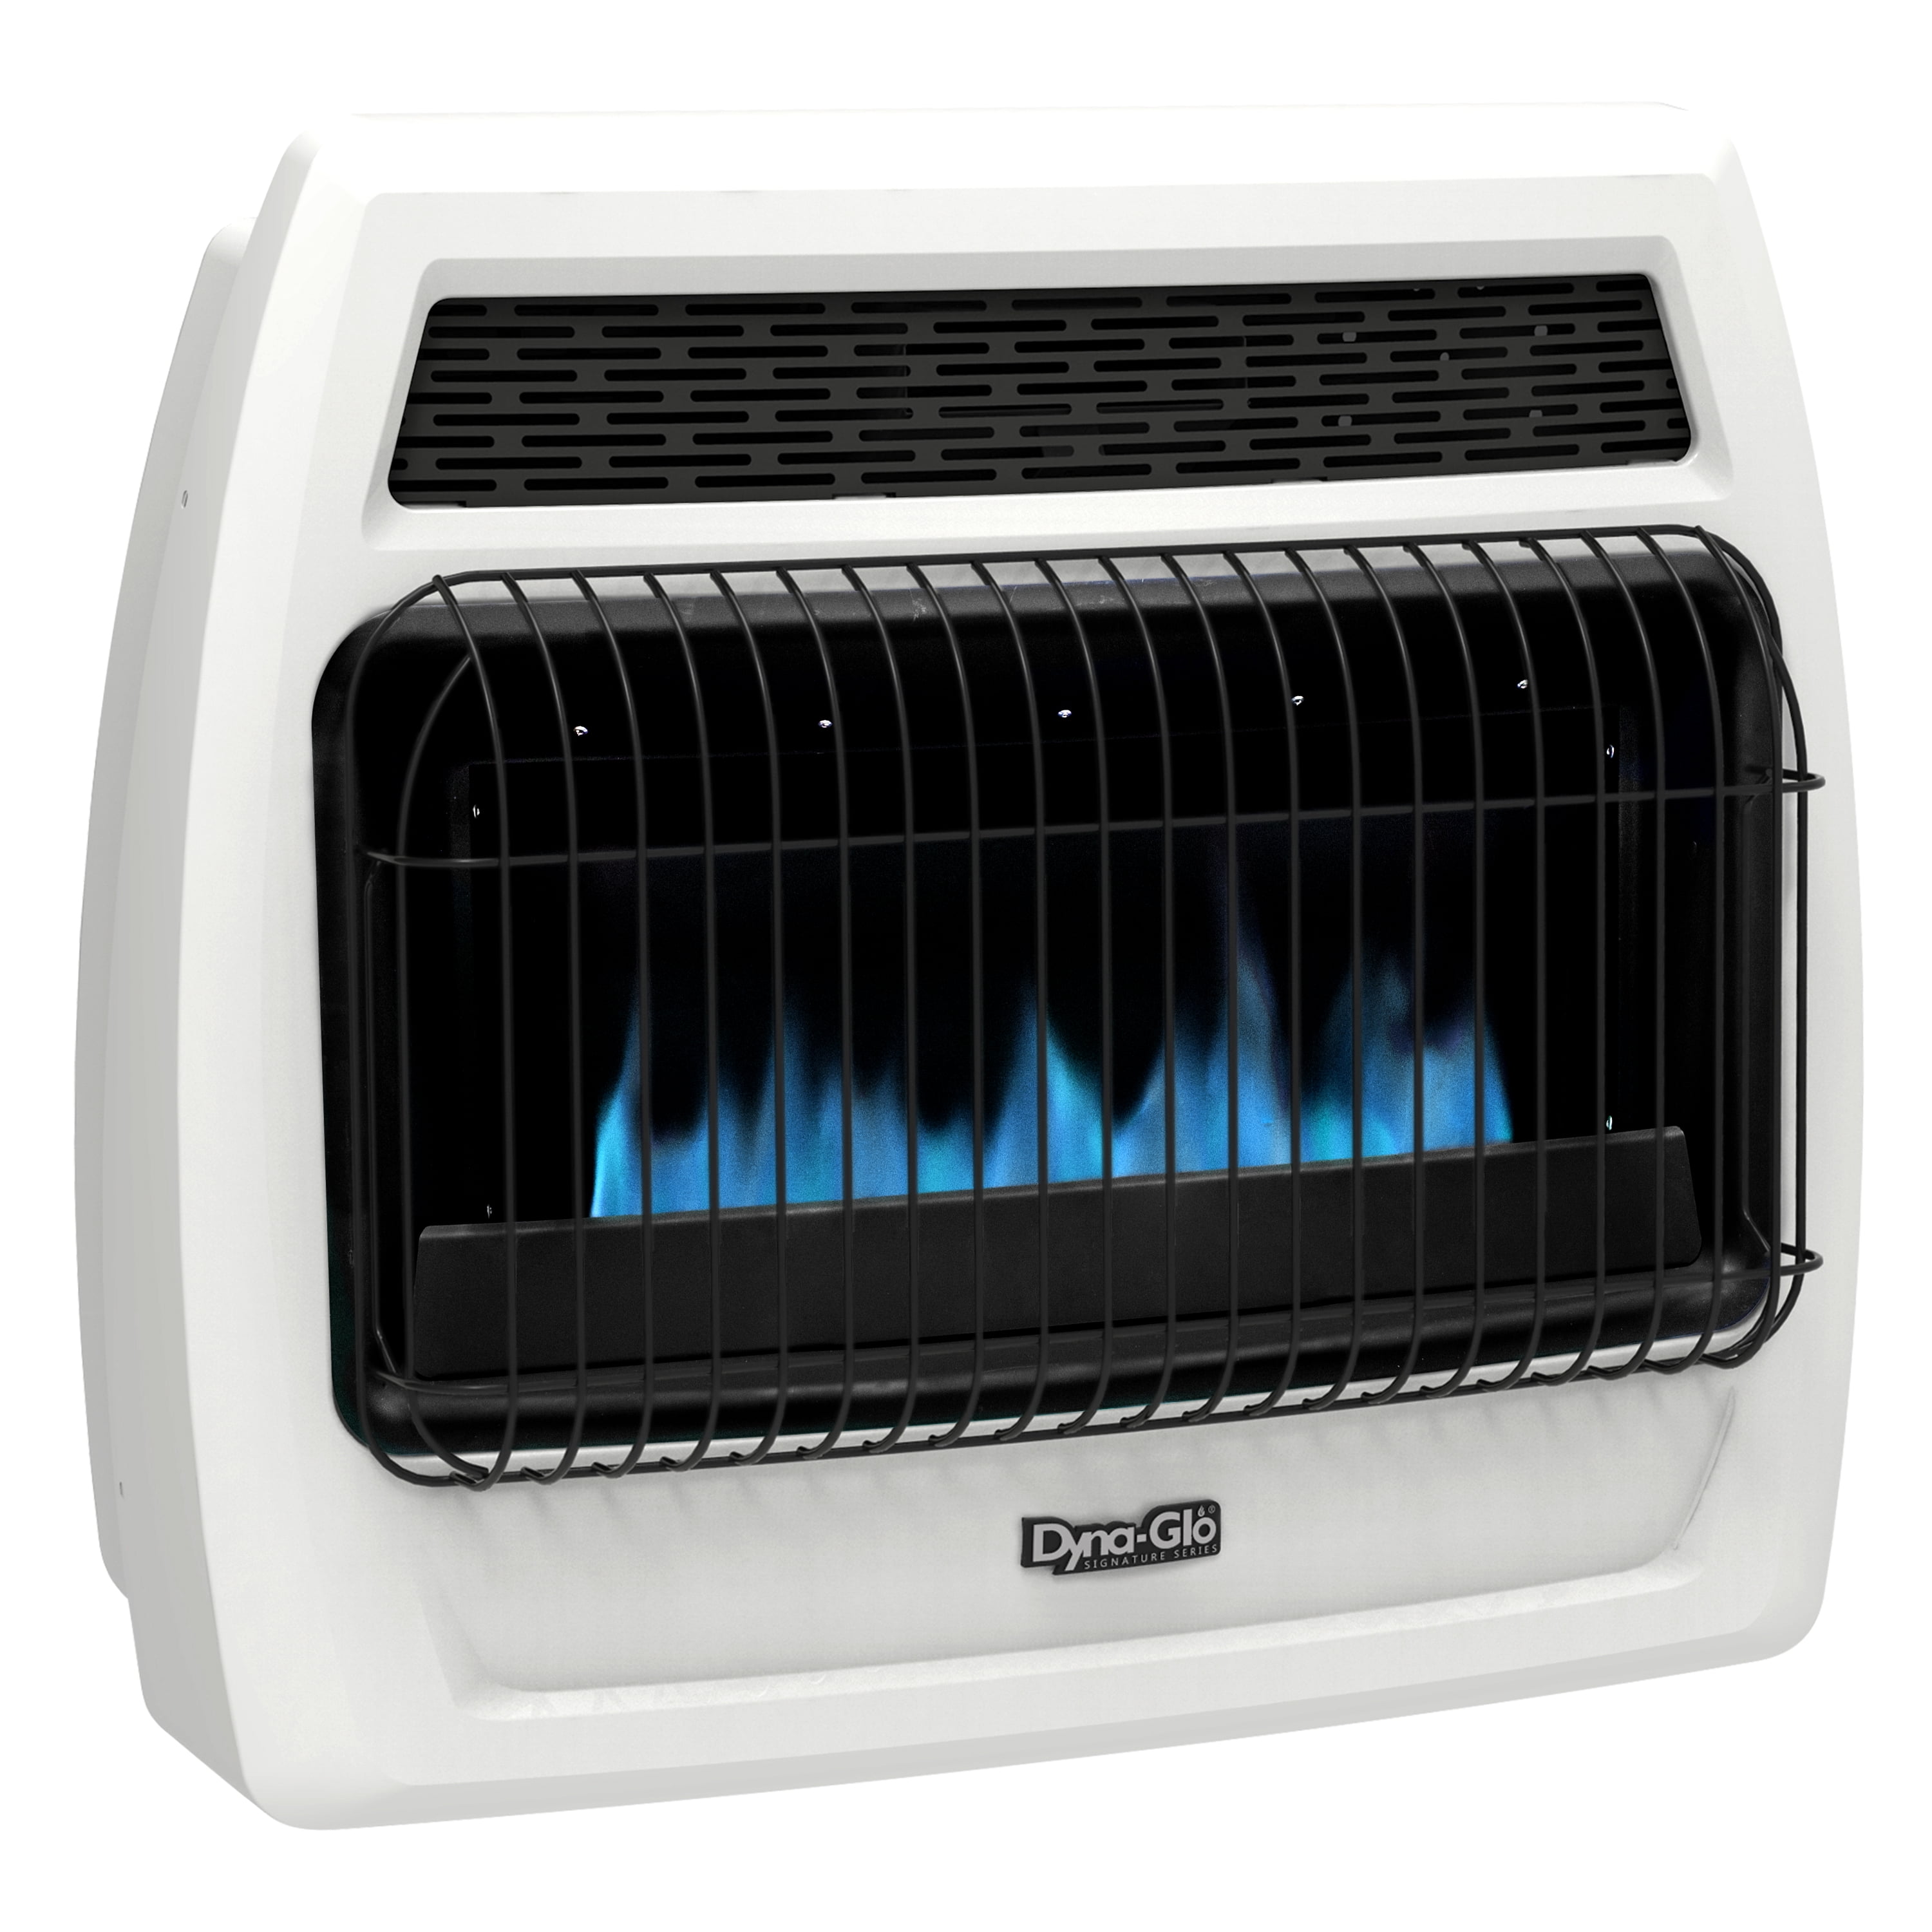 DynaGlo BFSS30NGT2N 30,000 BTU Natural Gas Blue Flame Vent Free Thermostatic Wall Heater